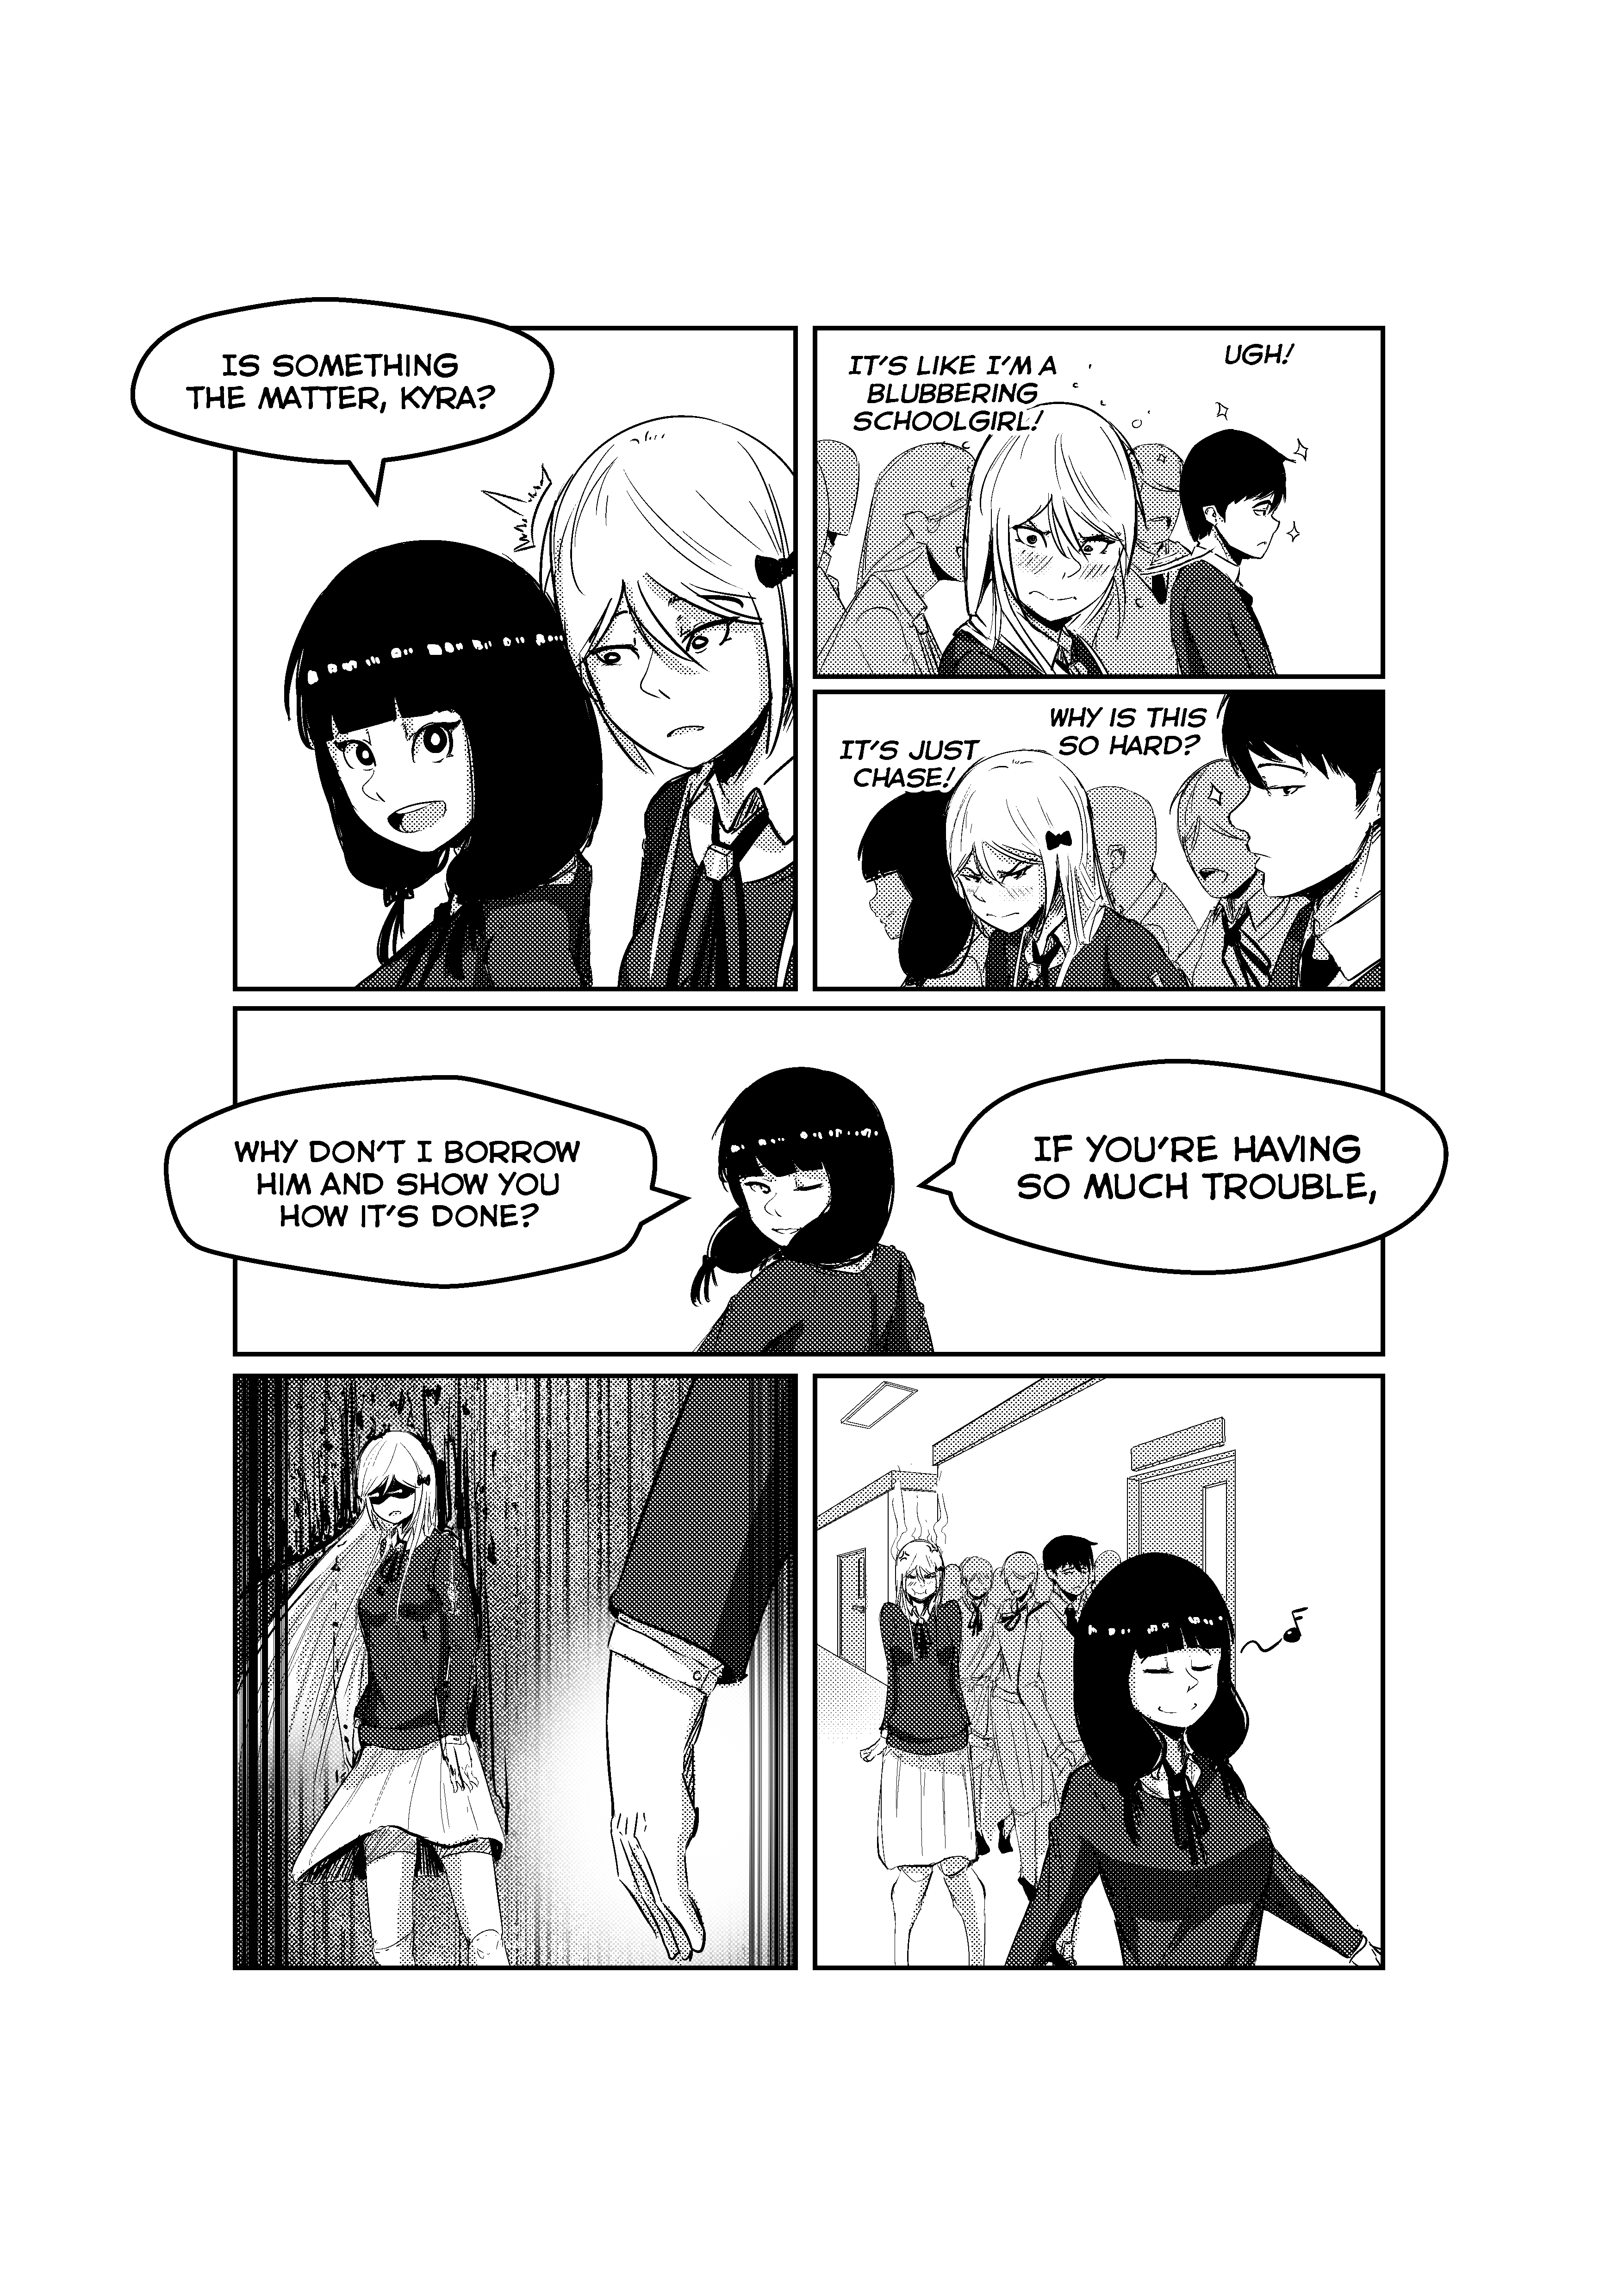 Opposites In Disguise - 8 page 17